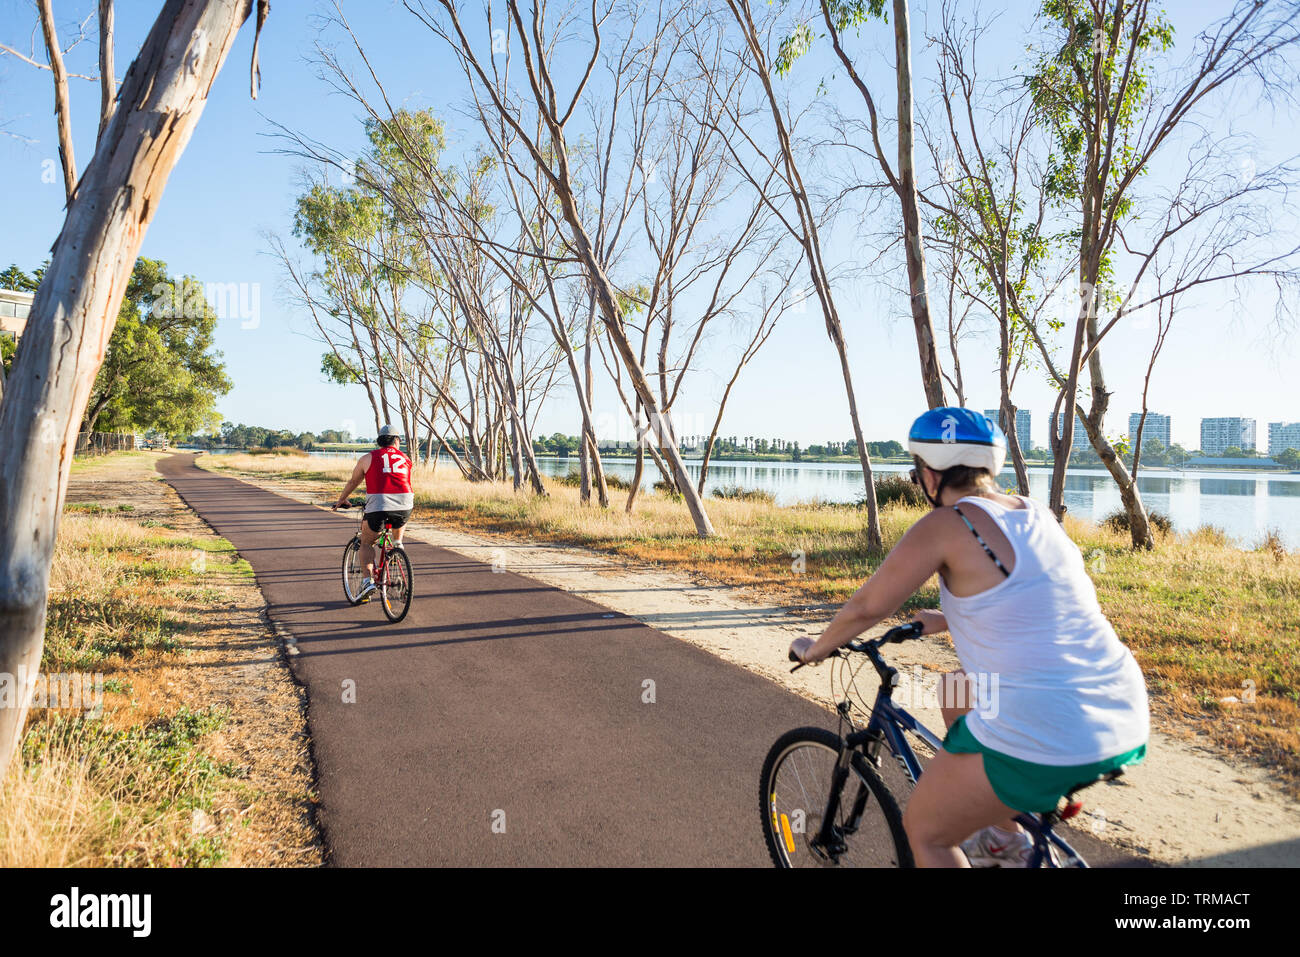 Two cyclists ride along the Principal Shared Path (PSP) bike lane beside the swan river in Perth, Western Australia Stock Photo